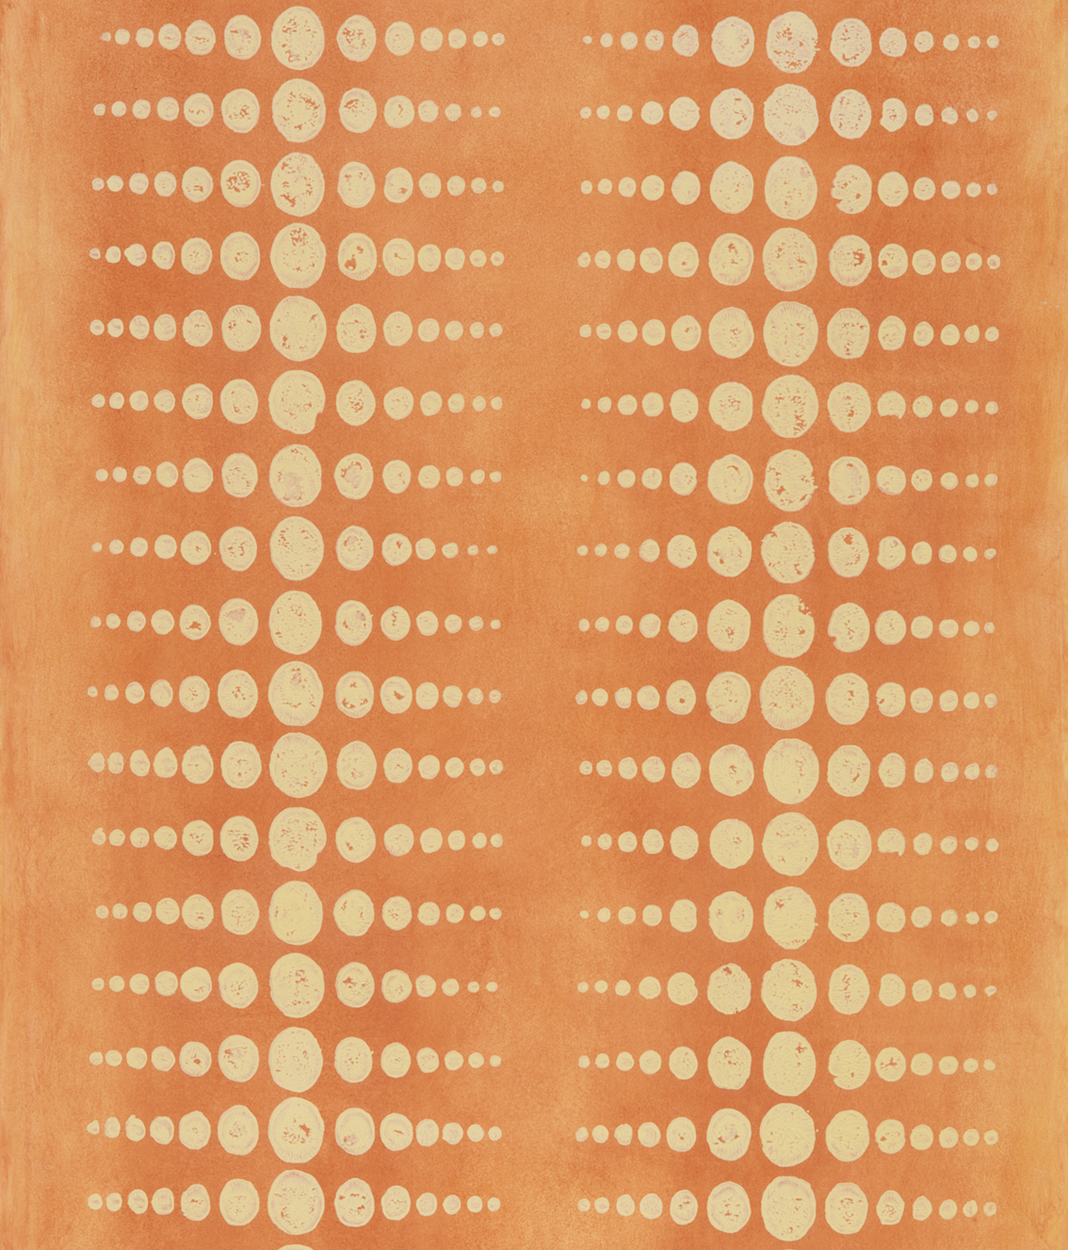 Two Columns Of Scaled Dots In Pale Yellow Printed Against A Background